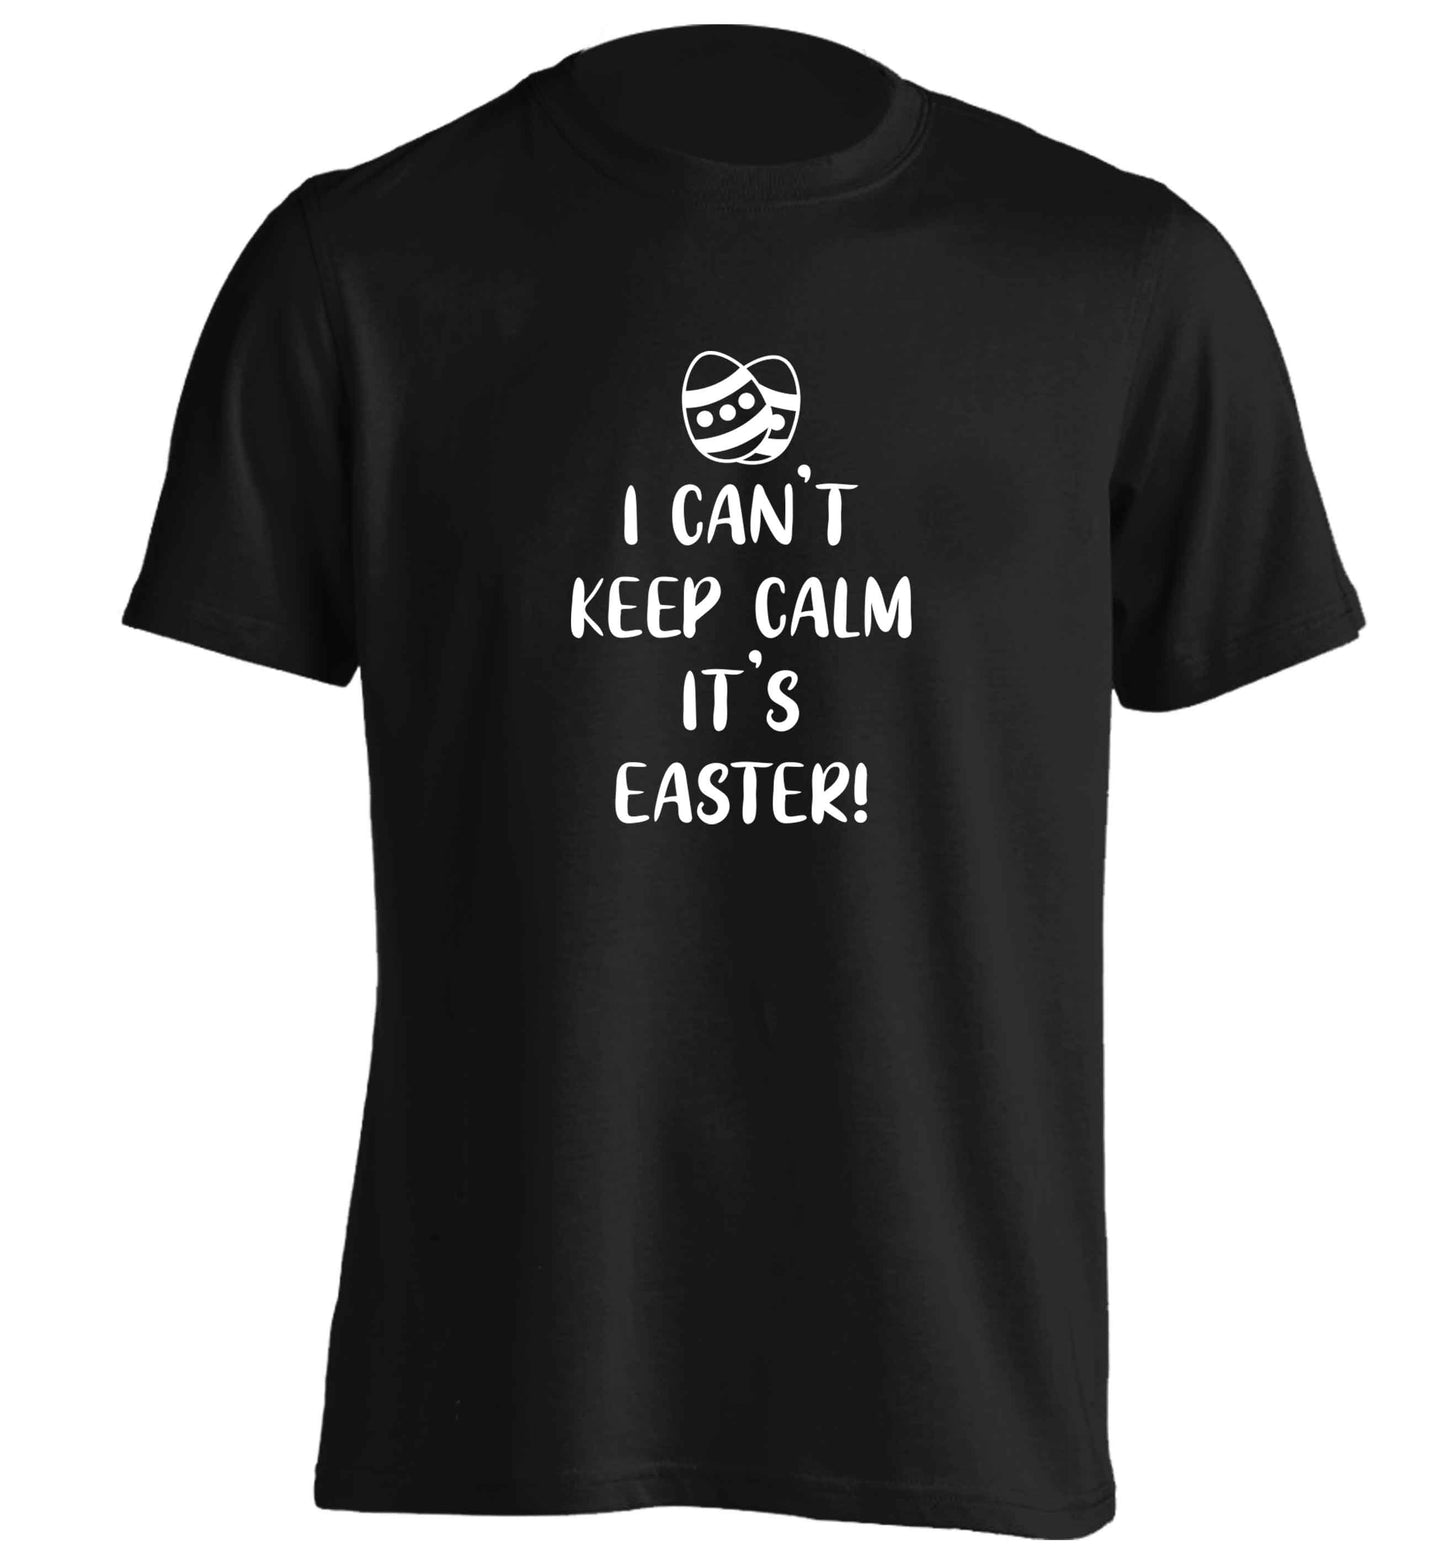 I can't keep calm it's Easter adults unisex black Tshirt 2XL